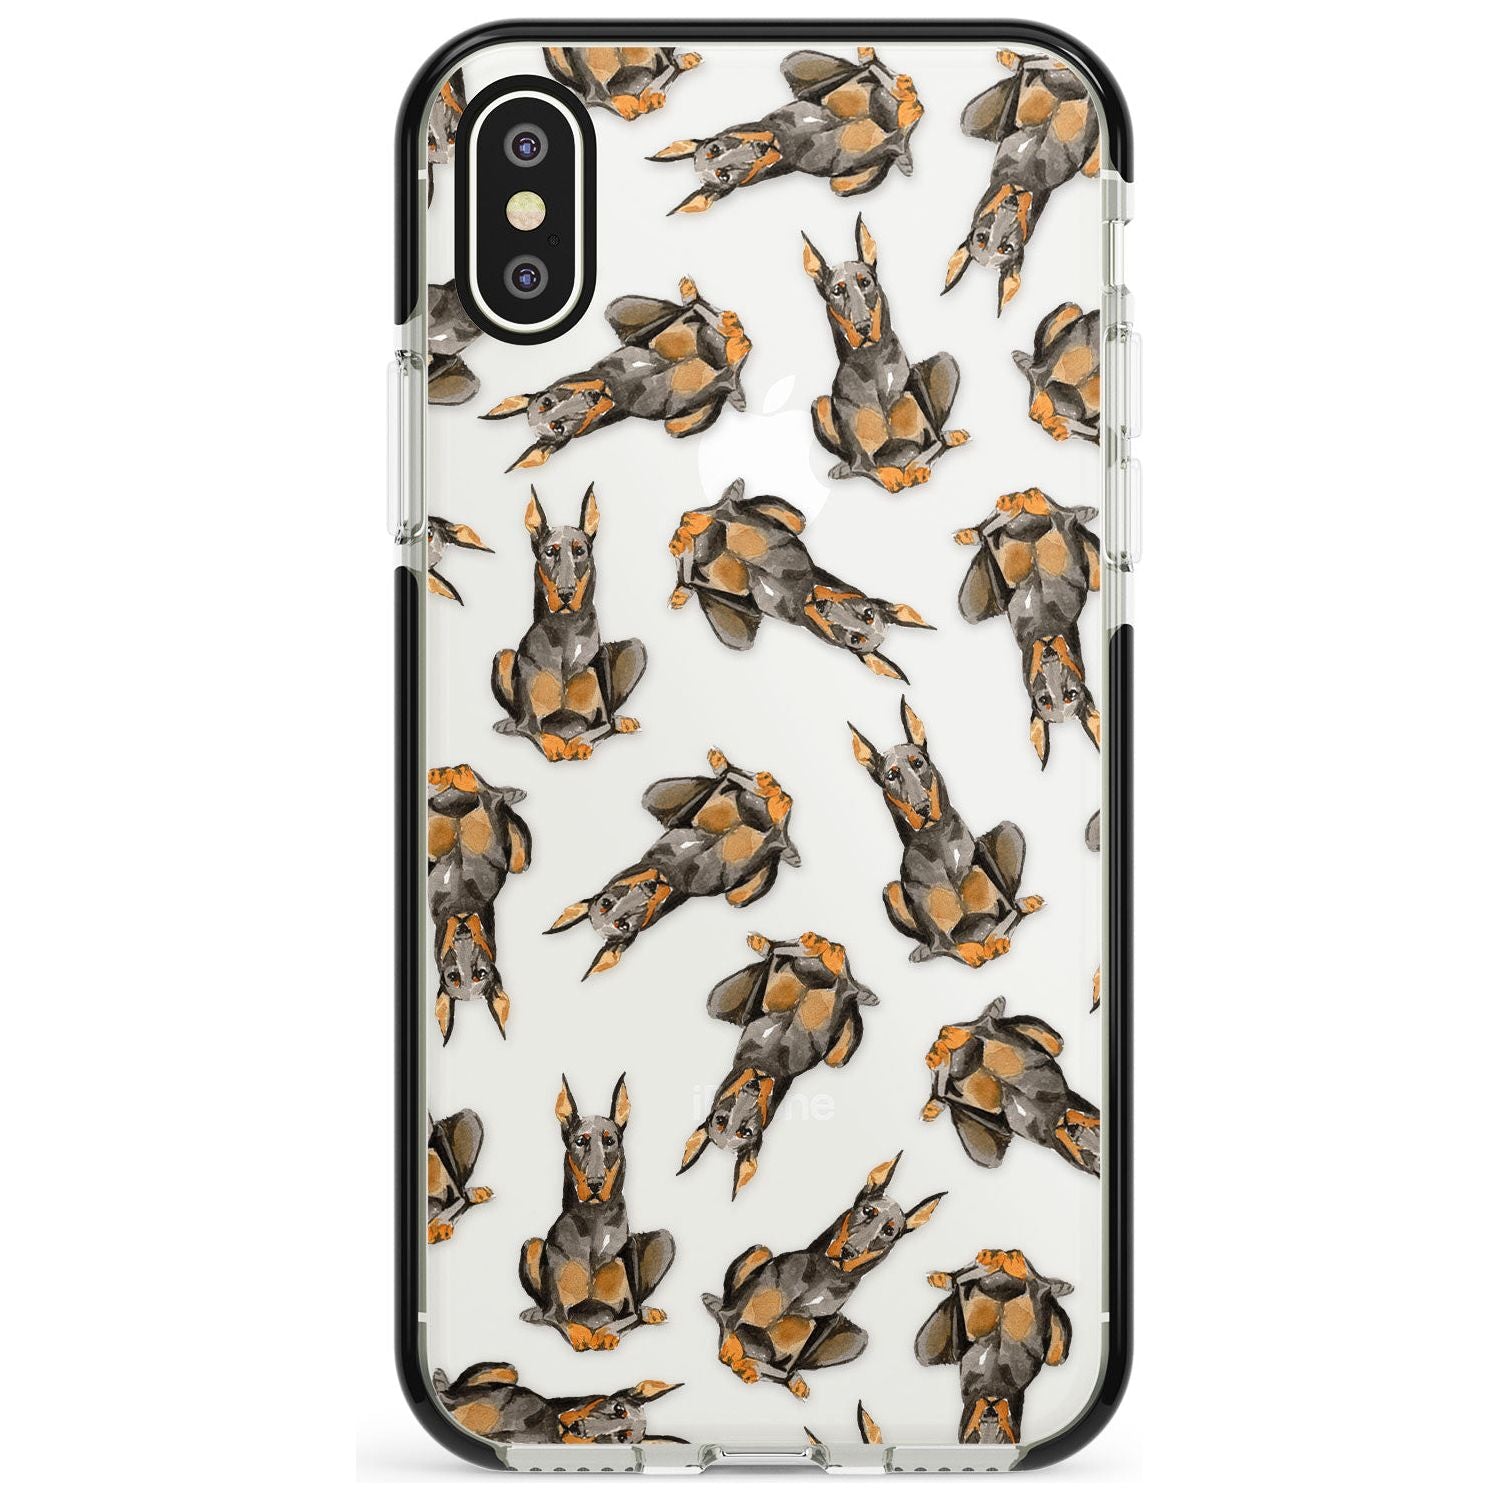 Doberman (Cropped) Watercolour Dog Pattern Black Impact Phone Case for iPhone X XS Max XR